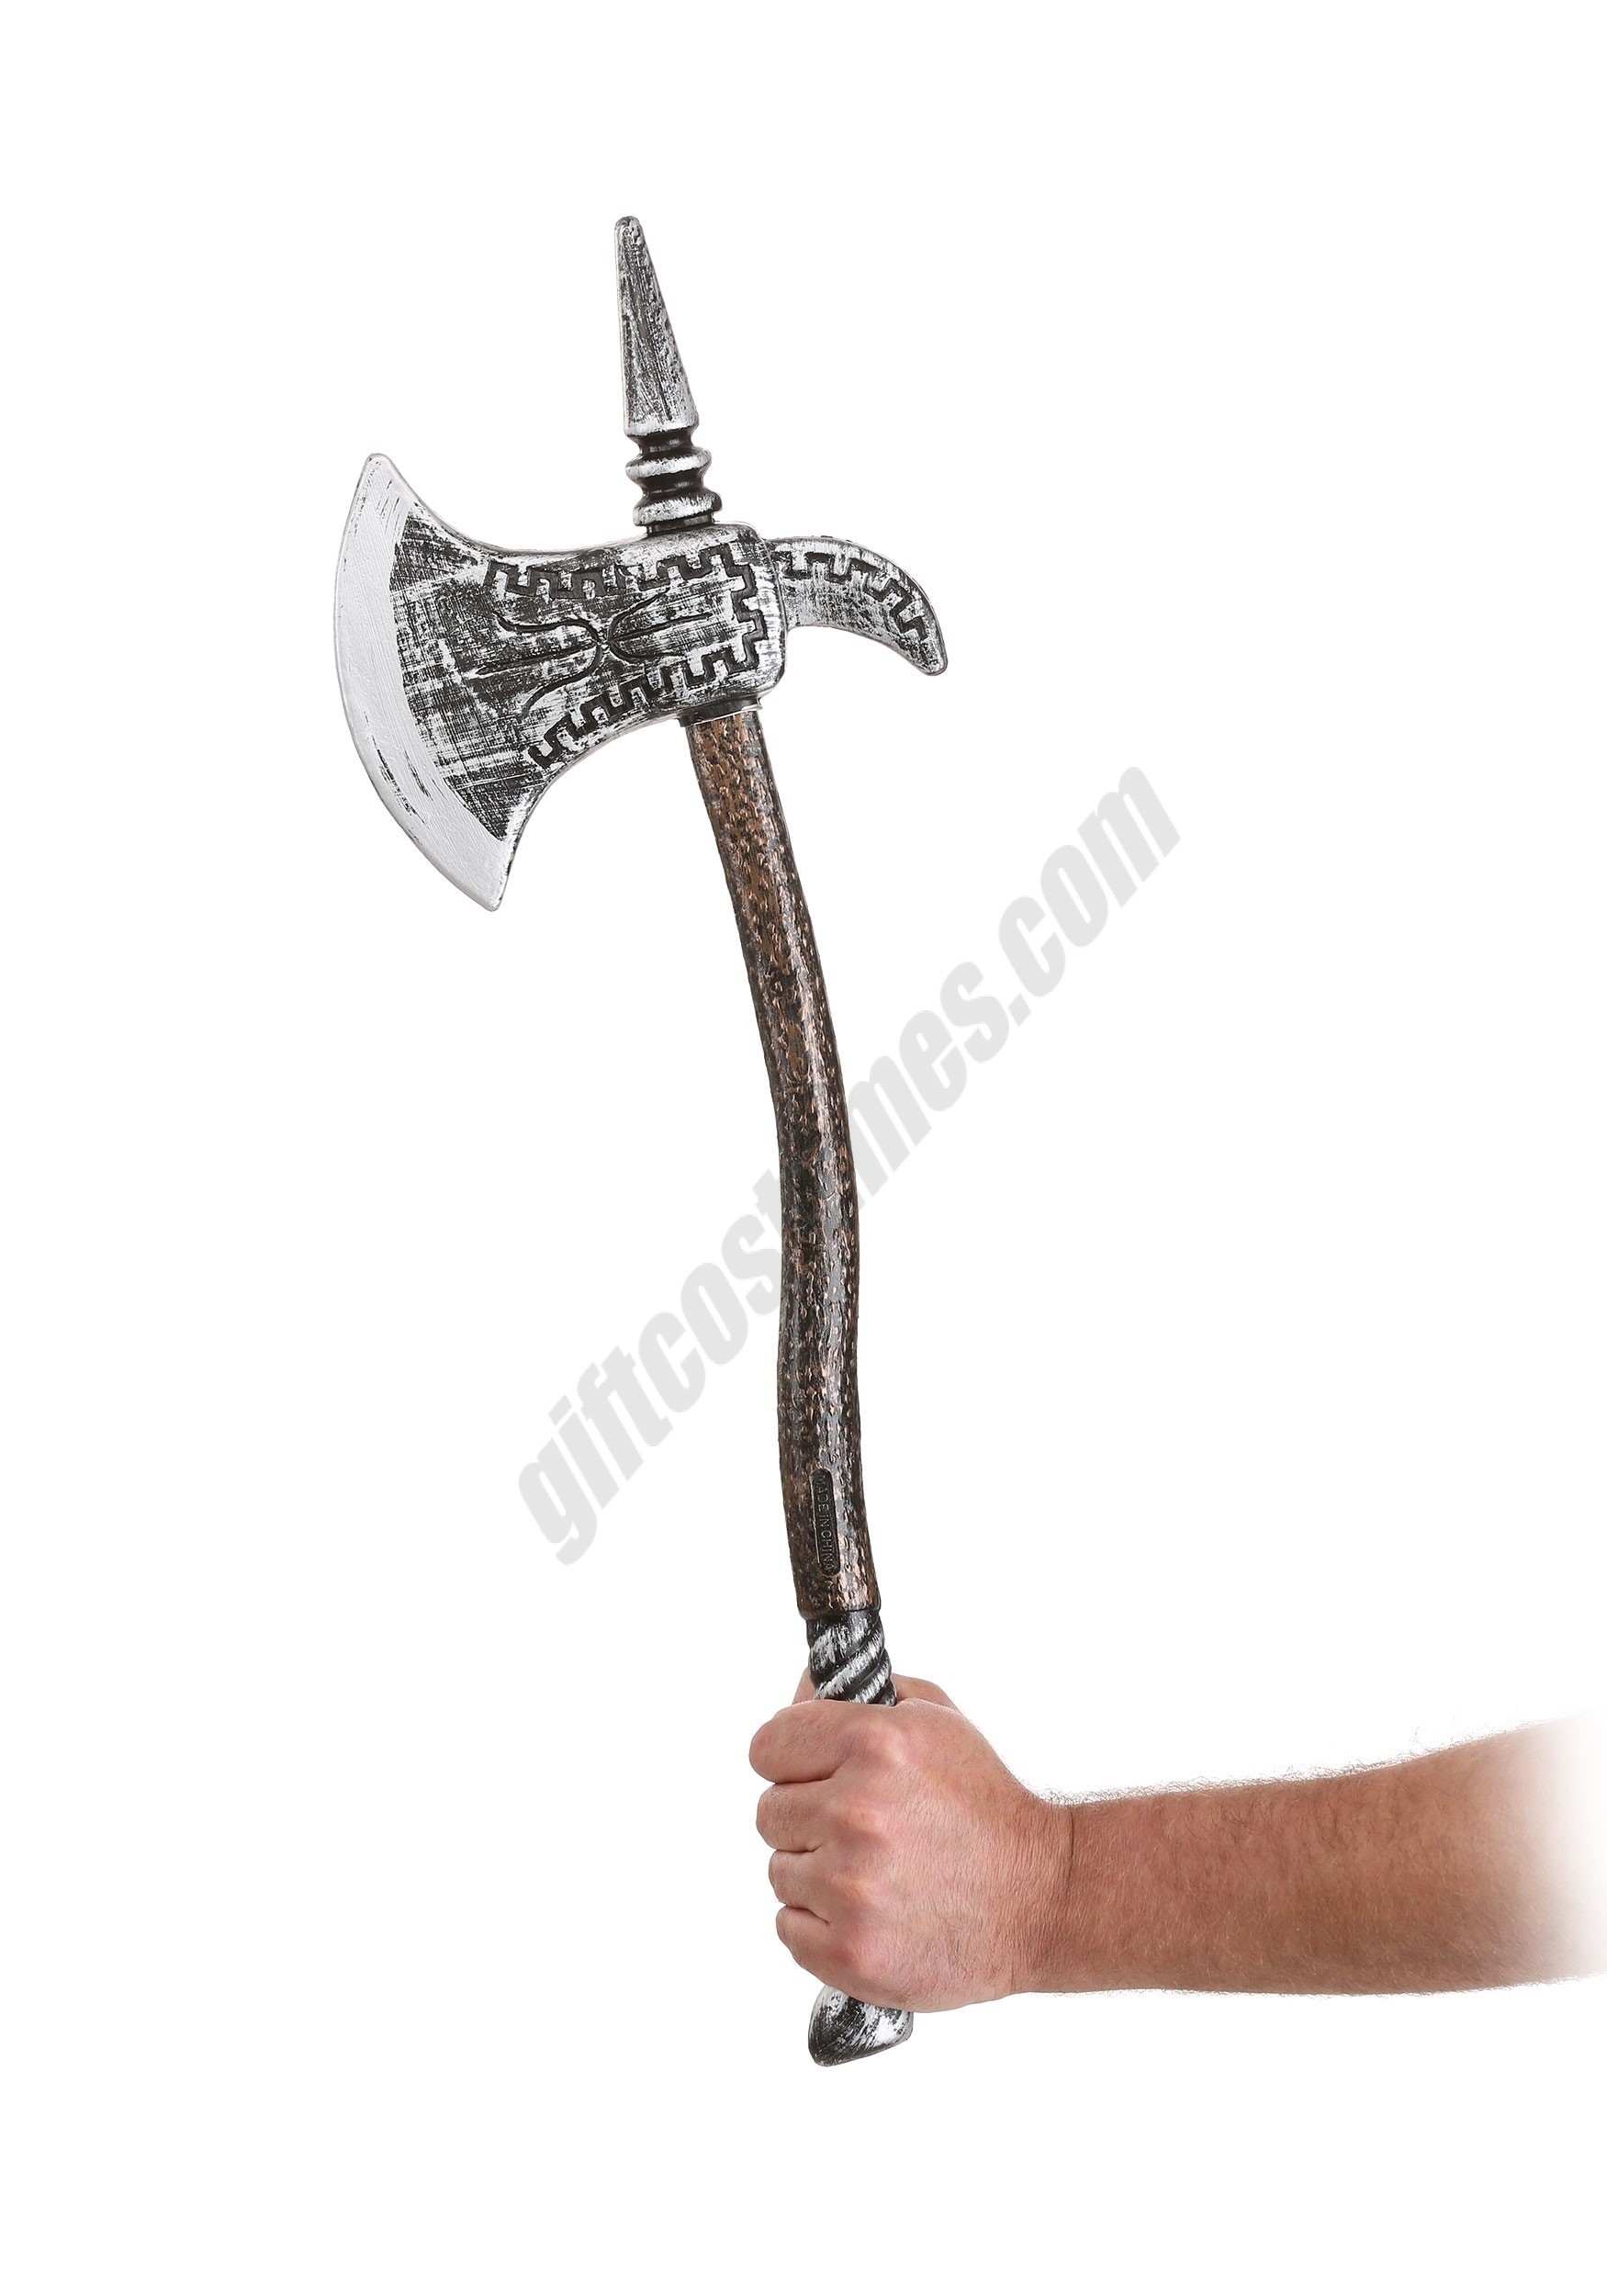 Viking Spear Axe Promotions - Viking Spear Axe Promotions